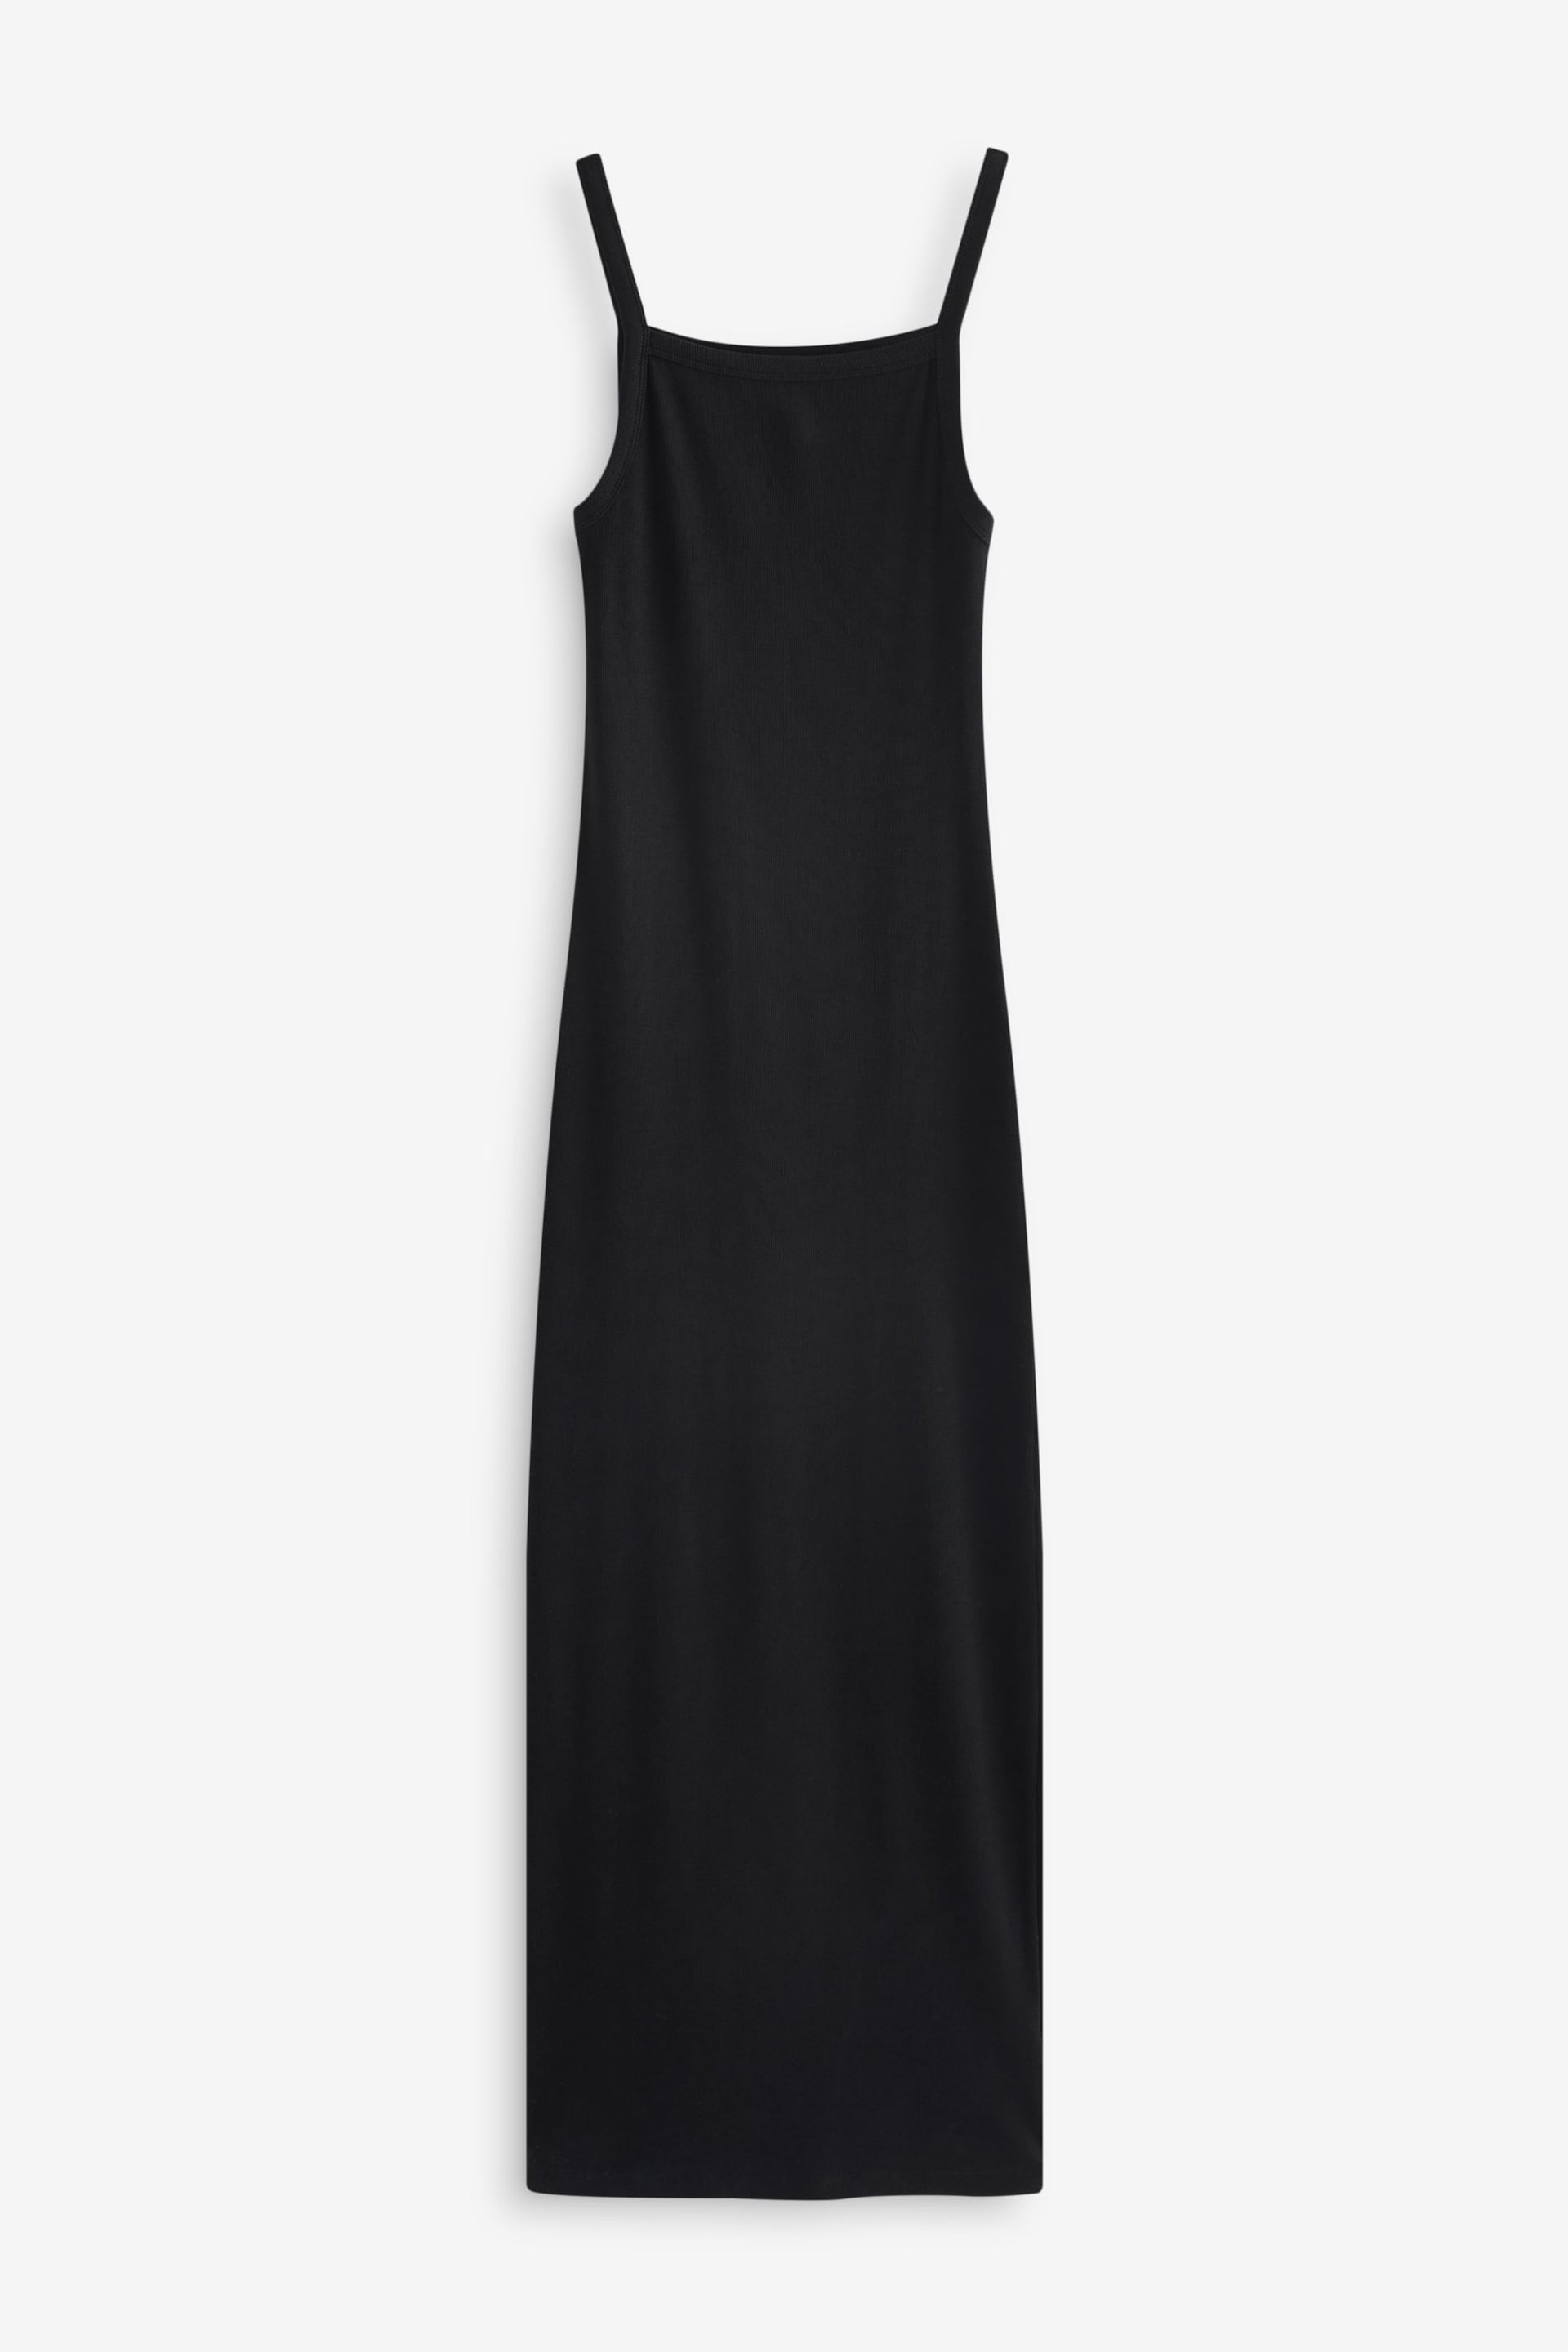 Black Strappy Ribbed Maxi Dress - Image 5 of 6